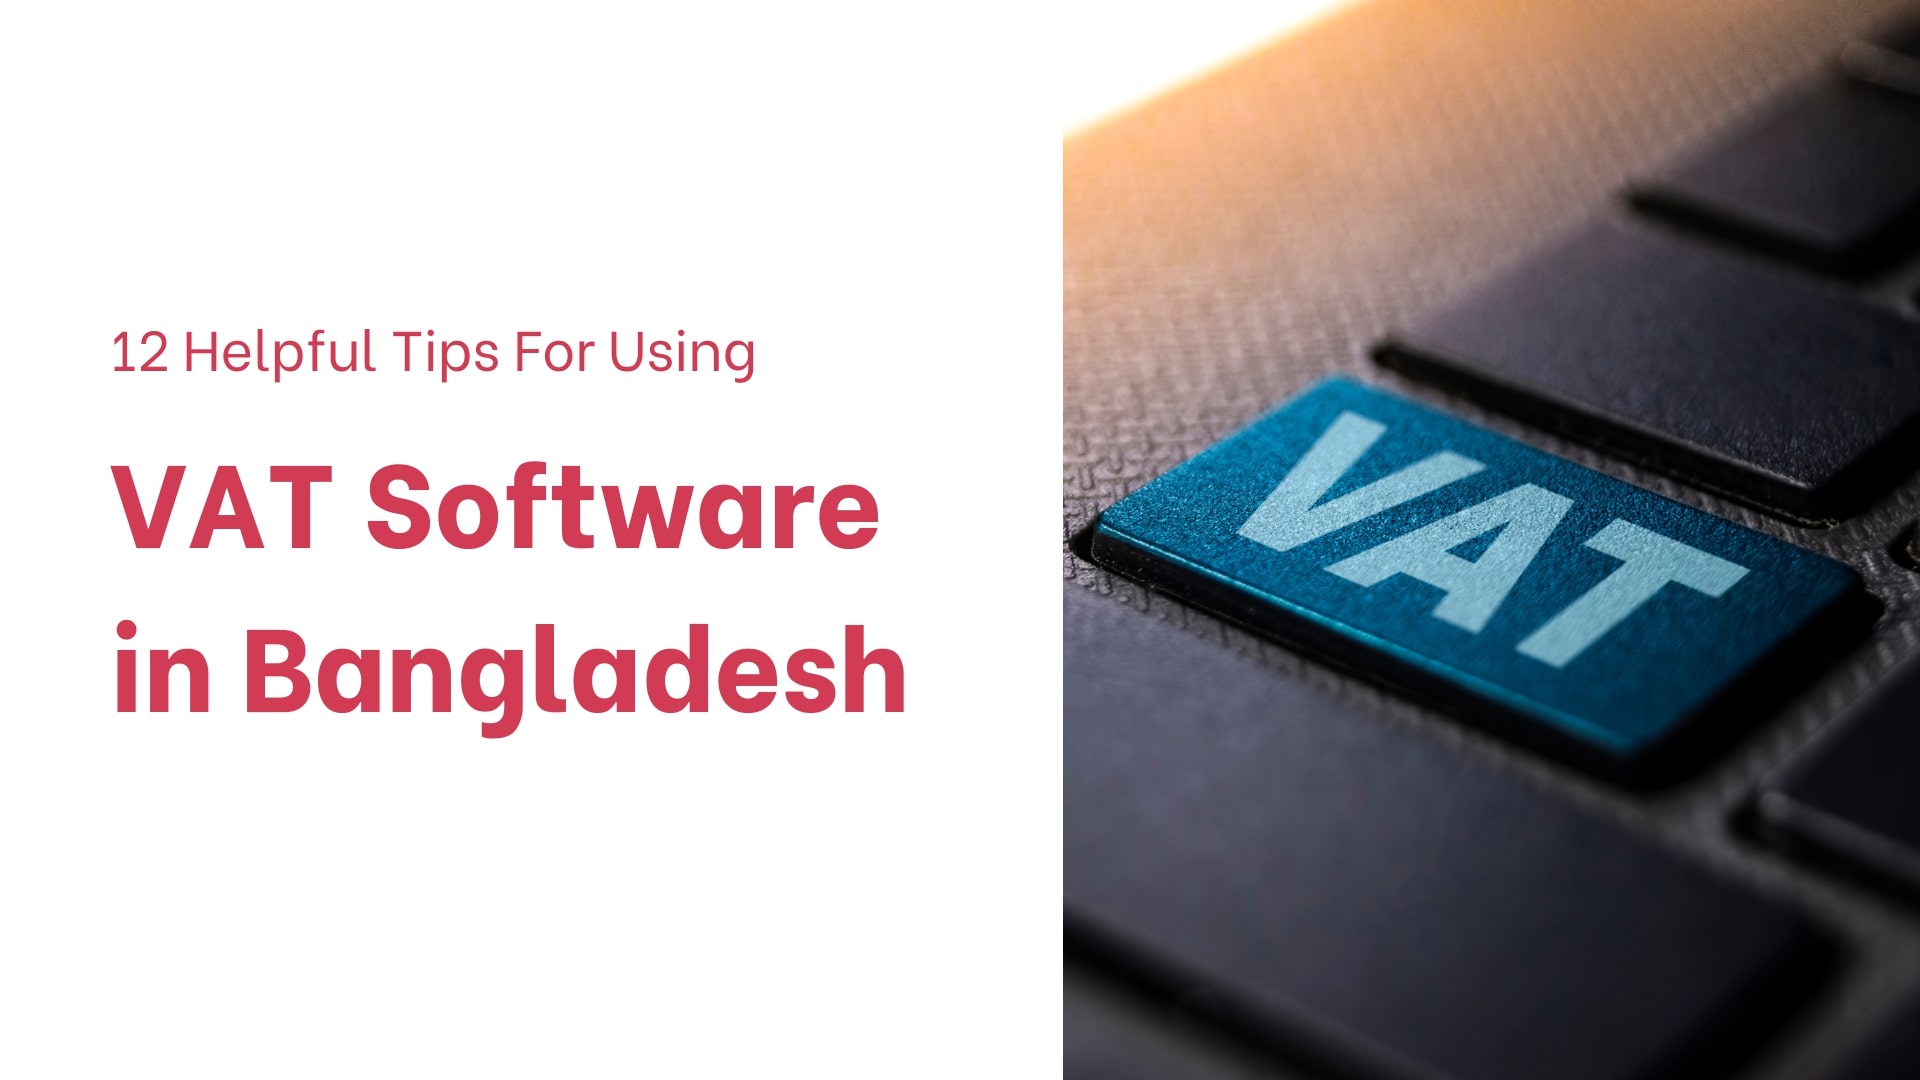 12 Helpful Tips For Using NBR Approved VAT Software in Bangladesh